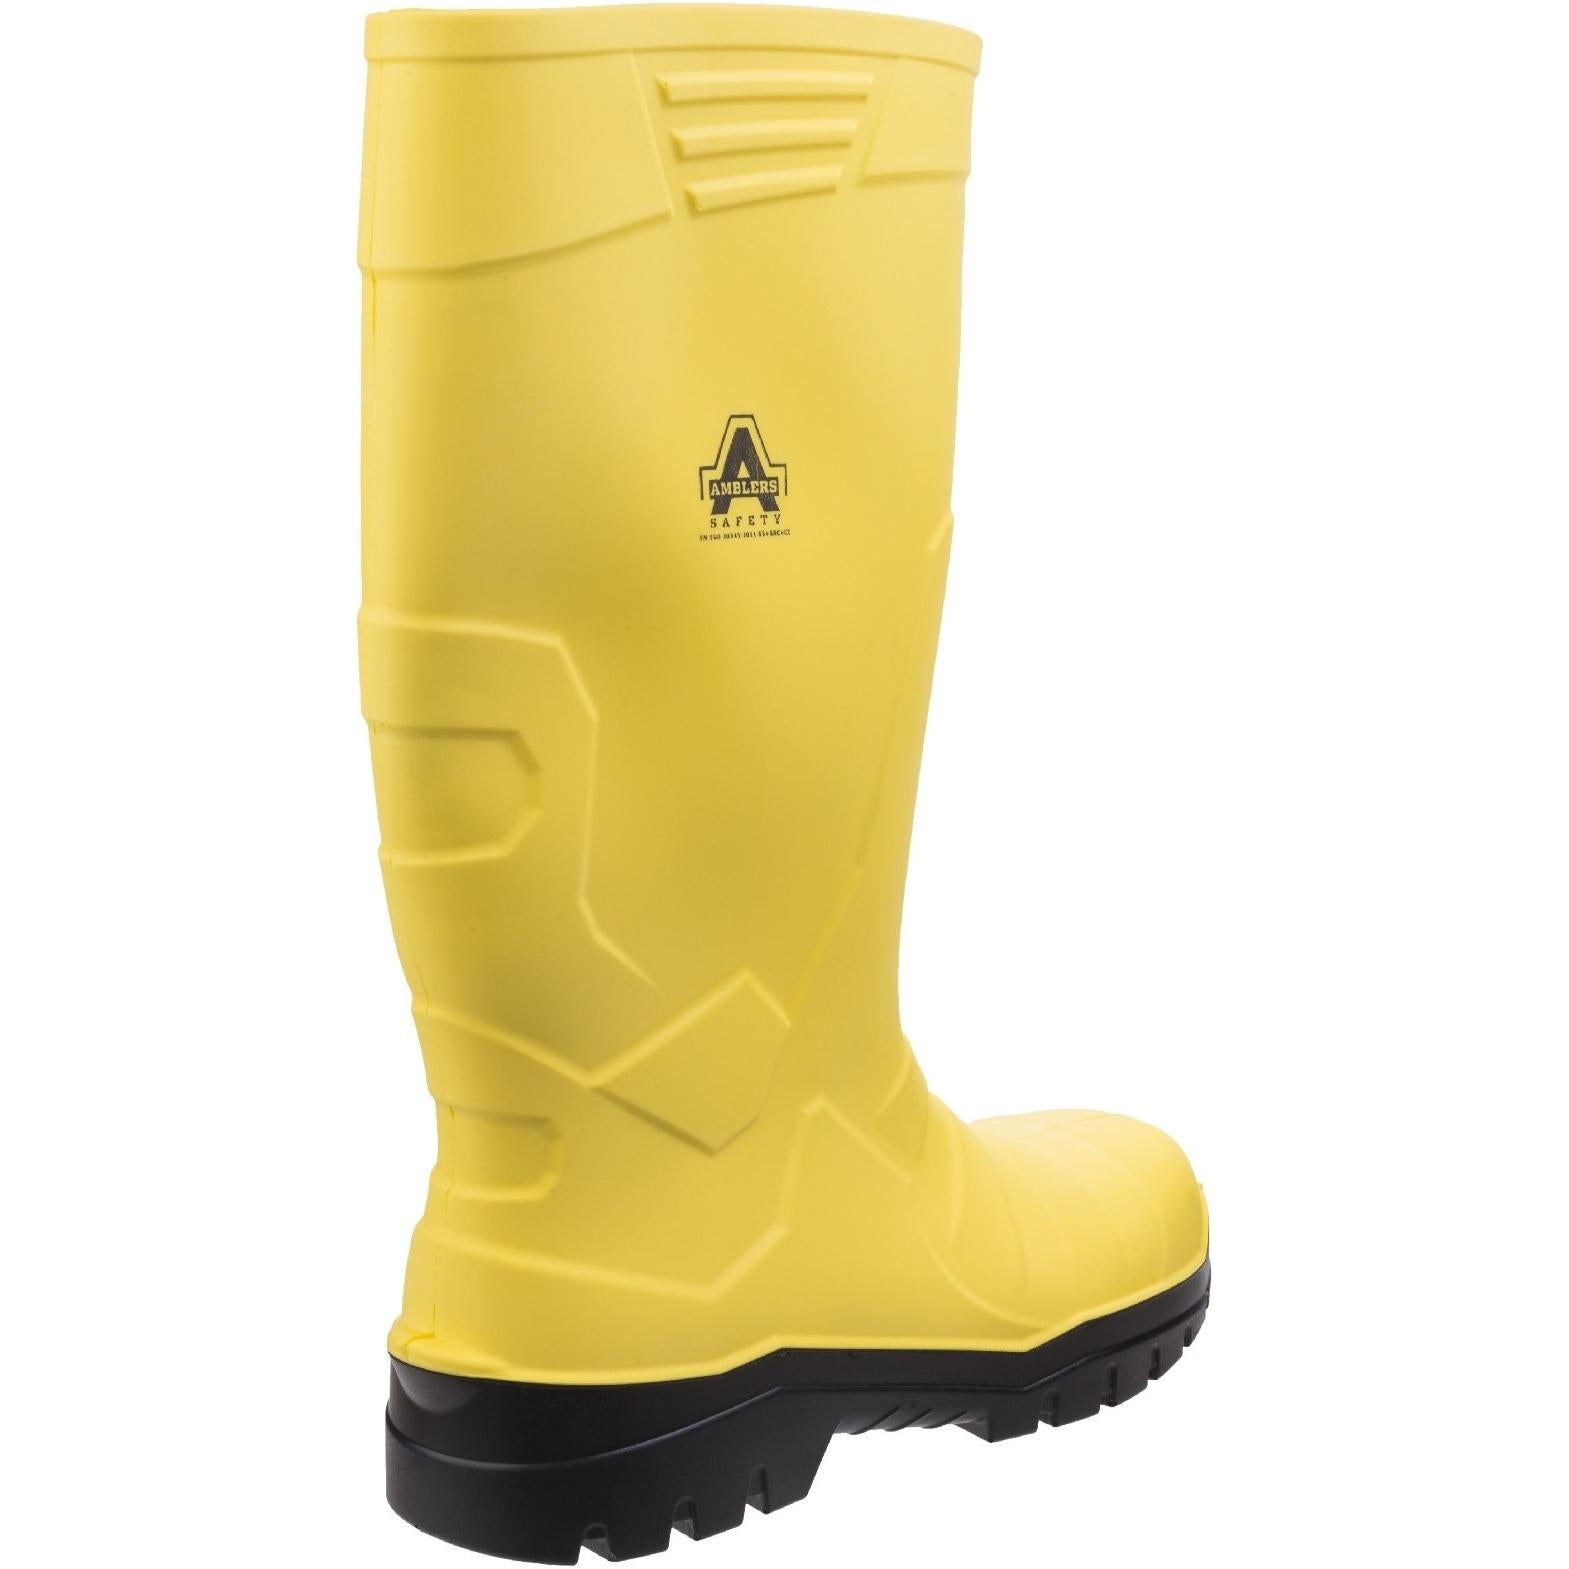 Amblers Safety AS1007 Full Safety Wellington Boots